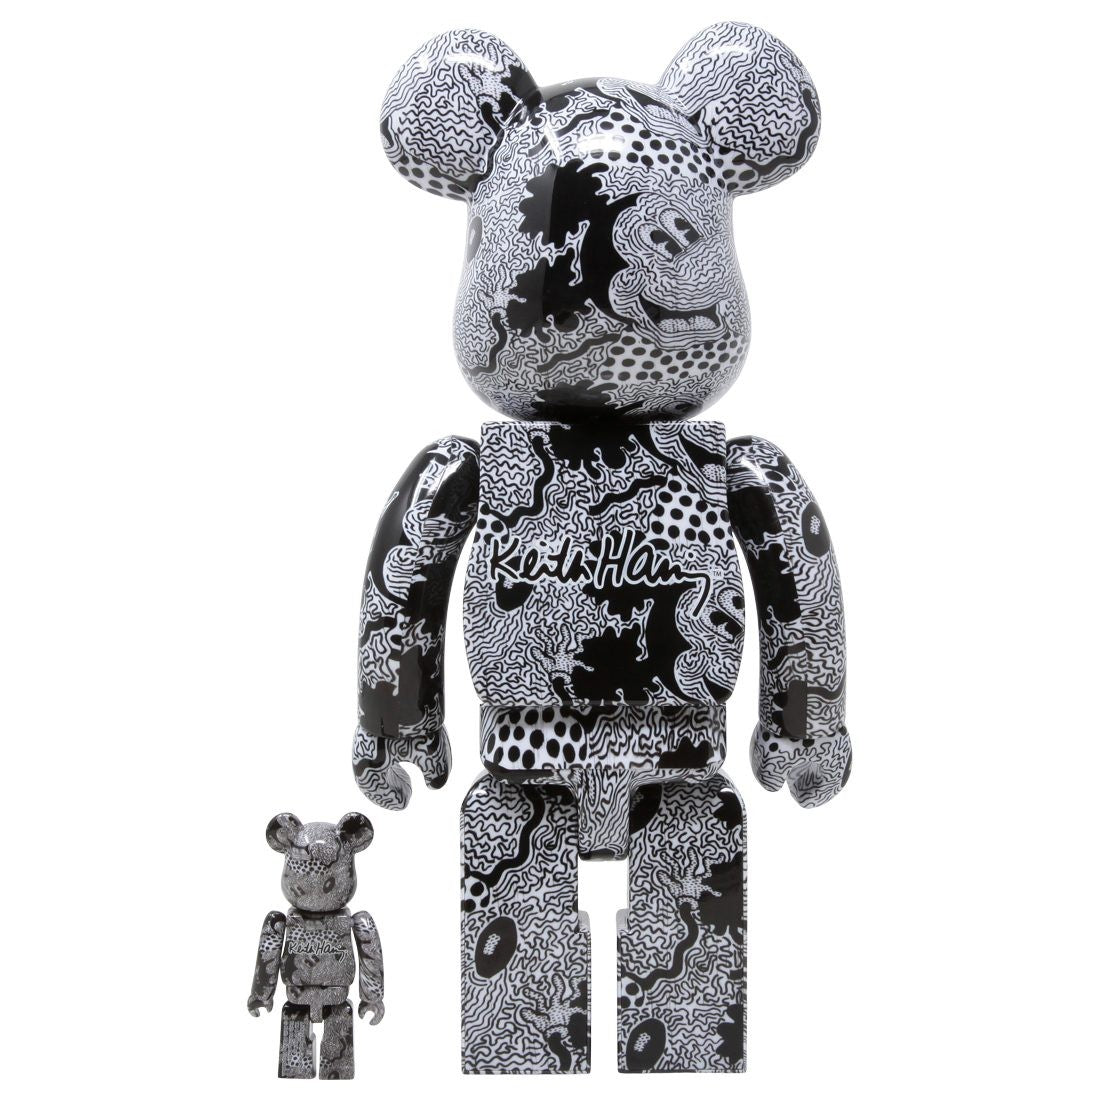 BEARBRICK Keith Haring 'Mickey Mouse' (400% + 100%)